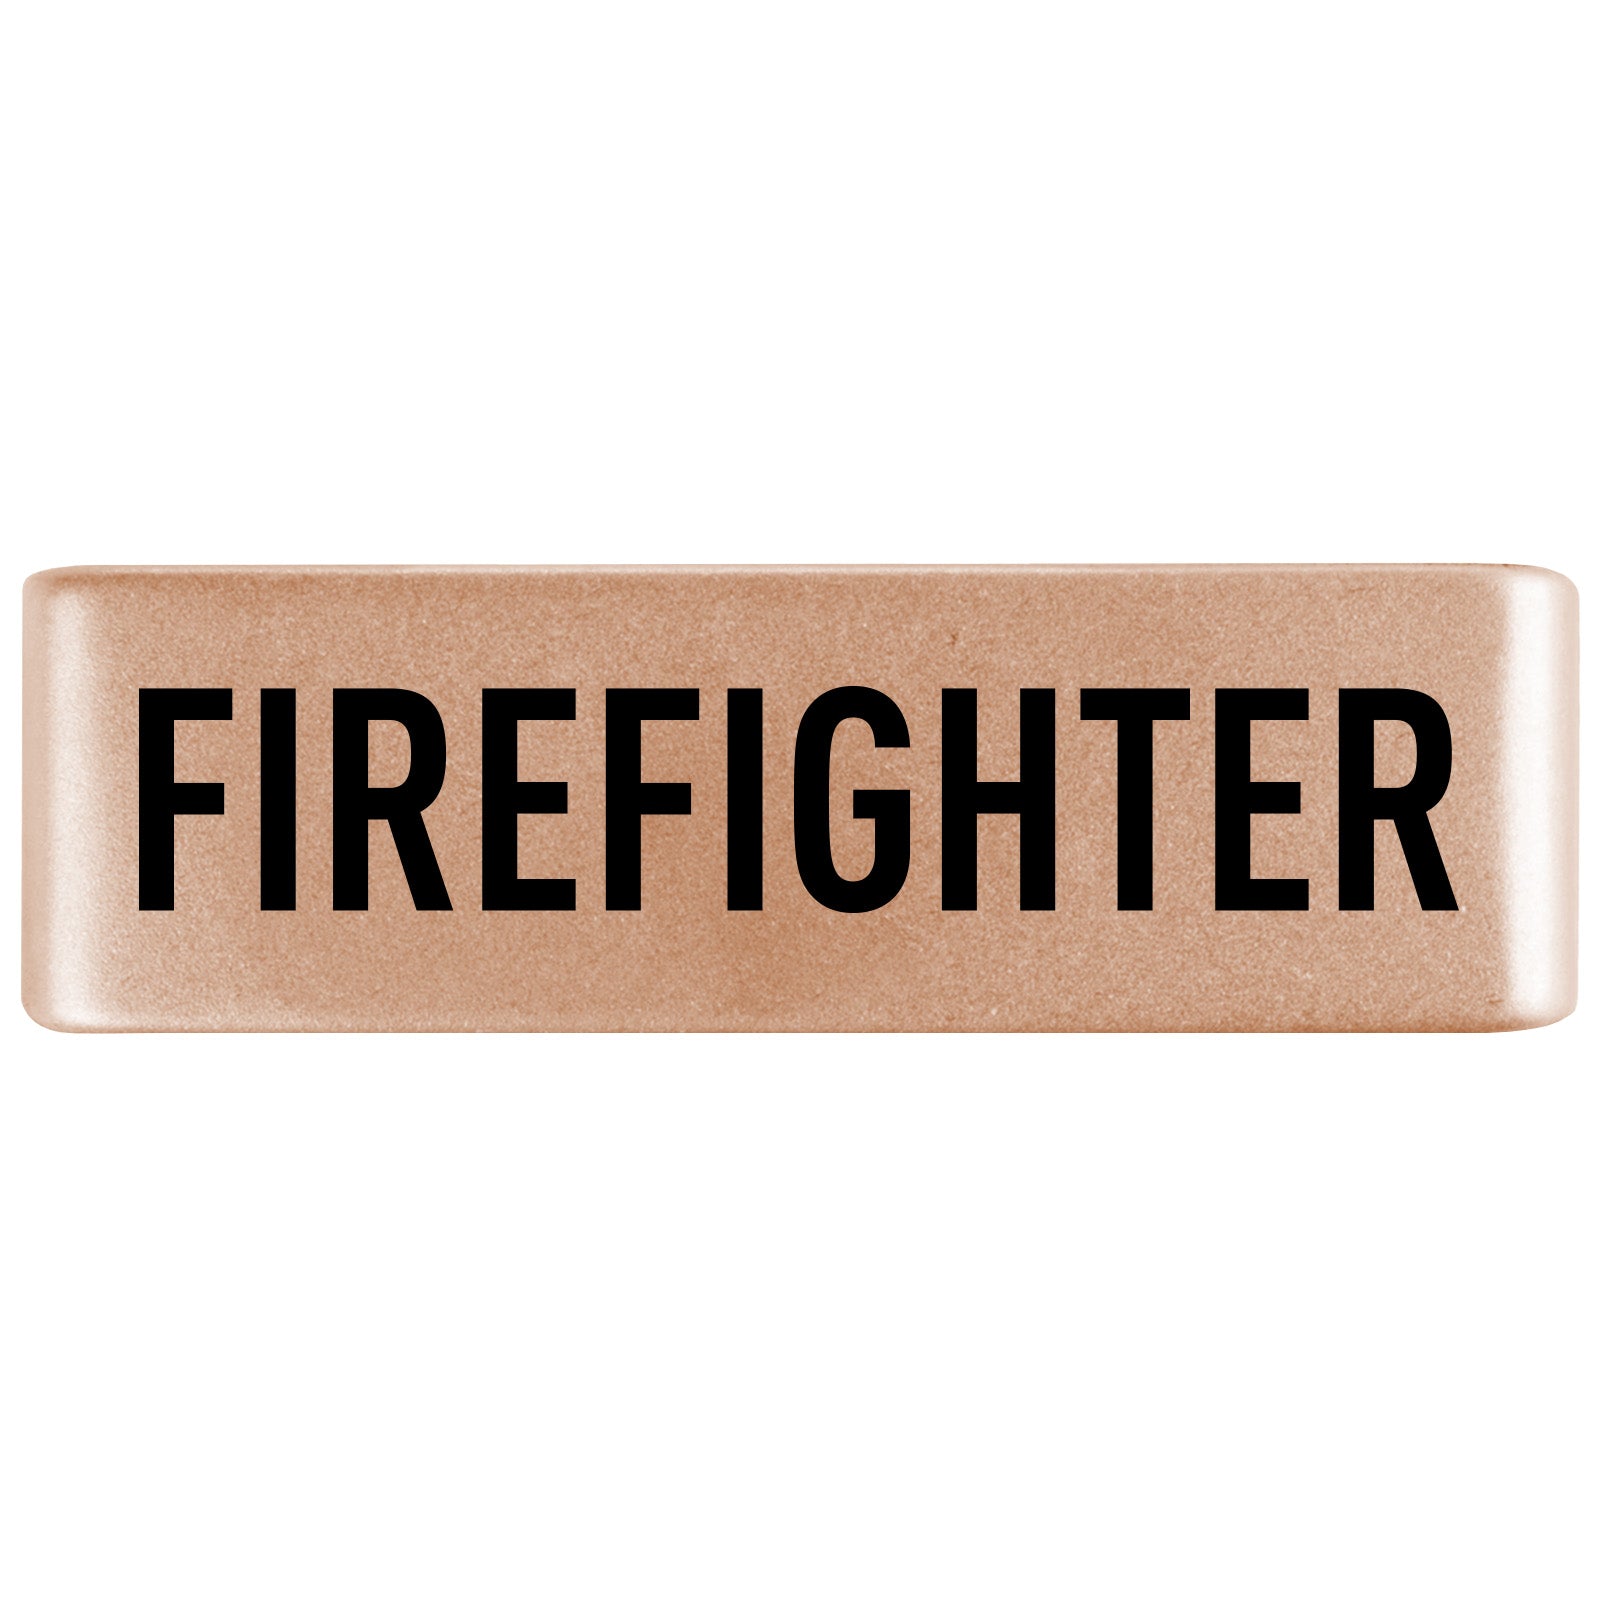 Firefighter Badge Badge 19mm - ROAD iD